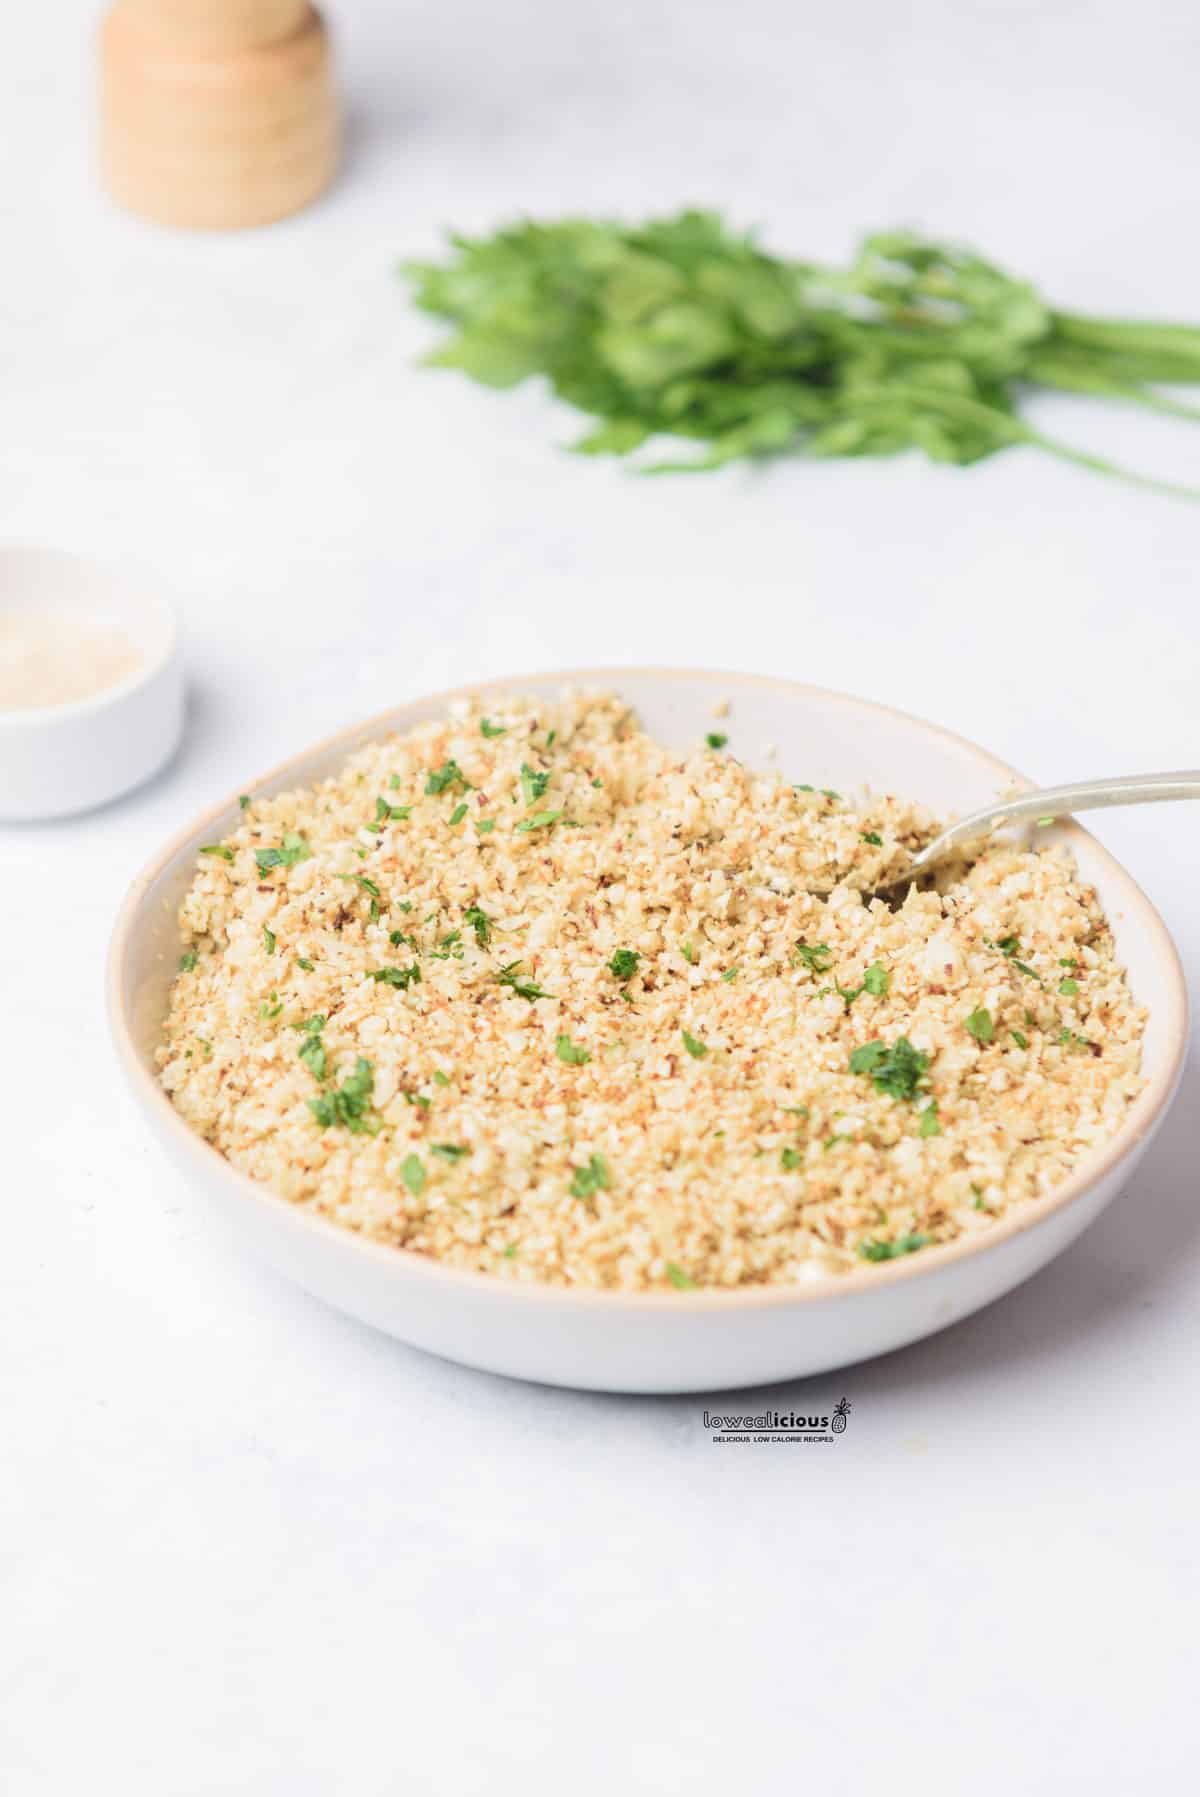 oven roasted cauliflower rice in a white serving bowl with a serving spoon in it, garnished with fresh parsley